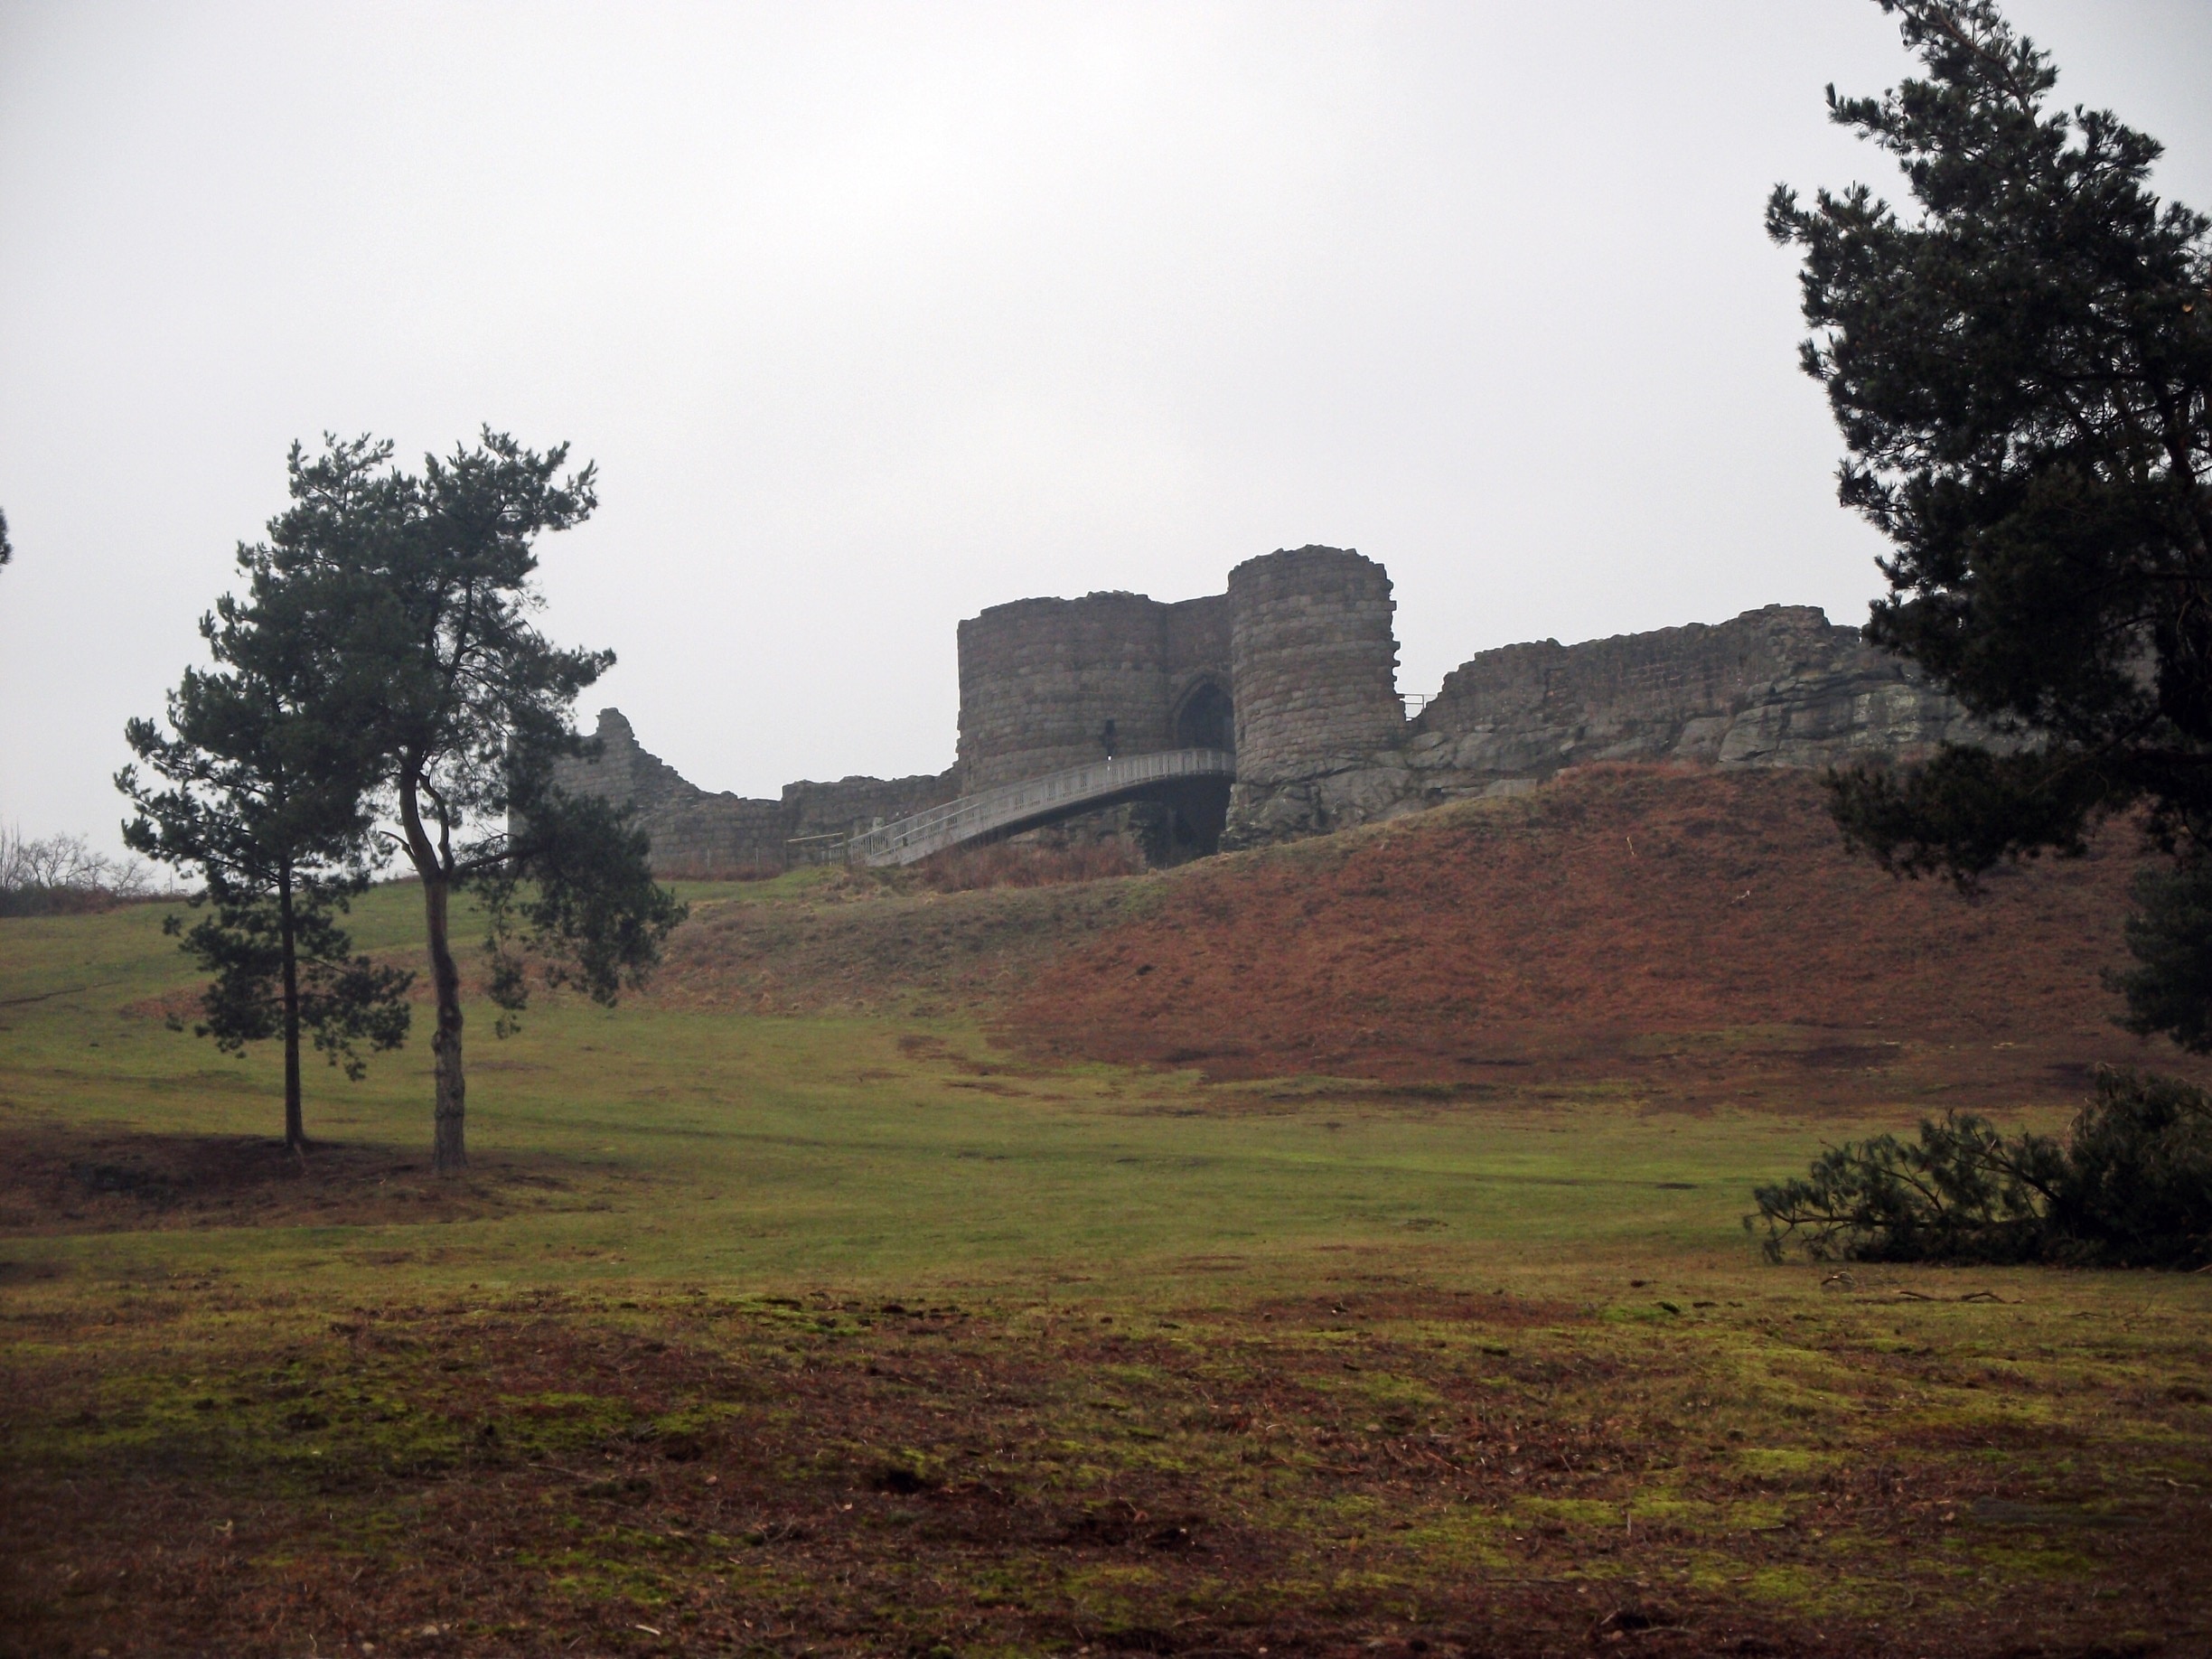 Autumnal colours and a misty grey sky lend a little atmosphere to Beeston Castle ruins in the background...